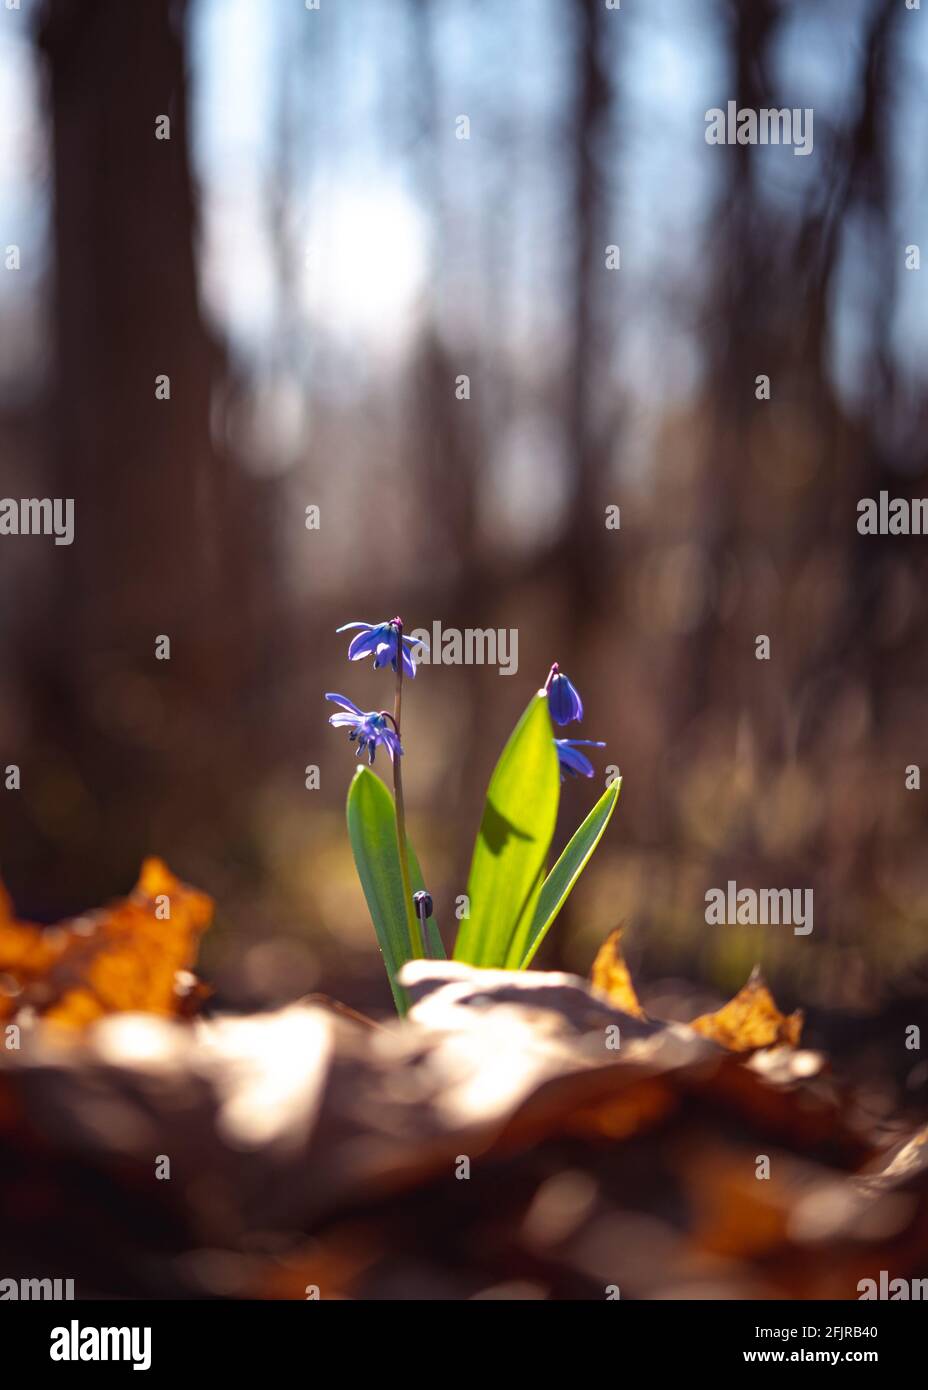 Scilla flowers bloom among fallen leaves in the spring forest lit with the sunlights. Selective focus. Stock Photo